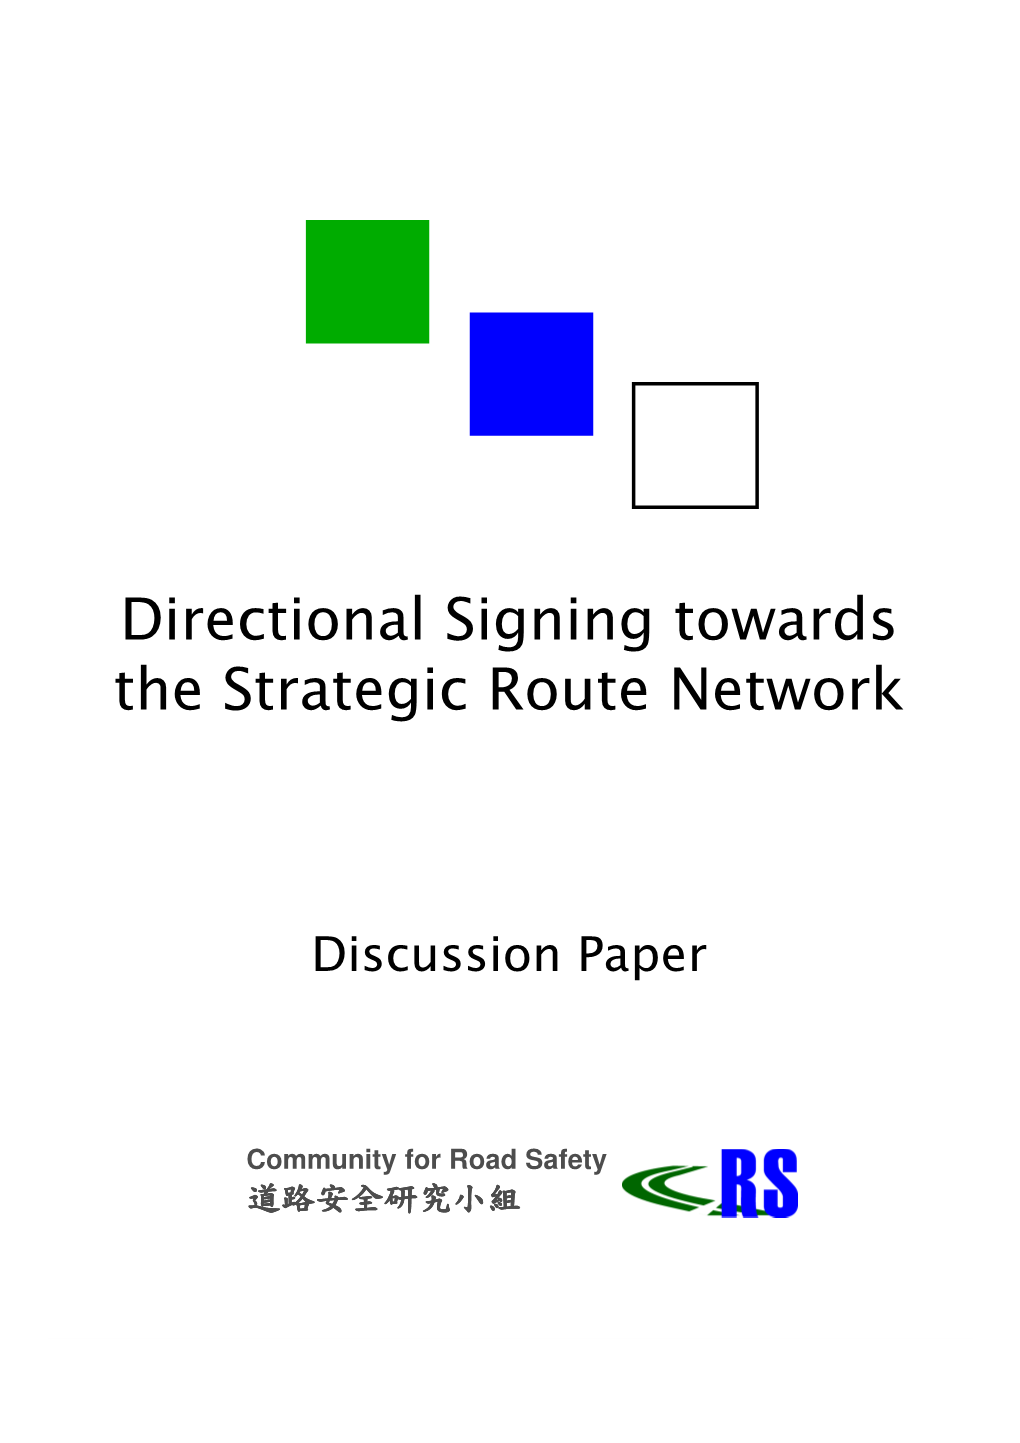 Directional Signing Towards the Strategic Route Network